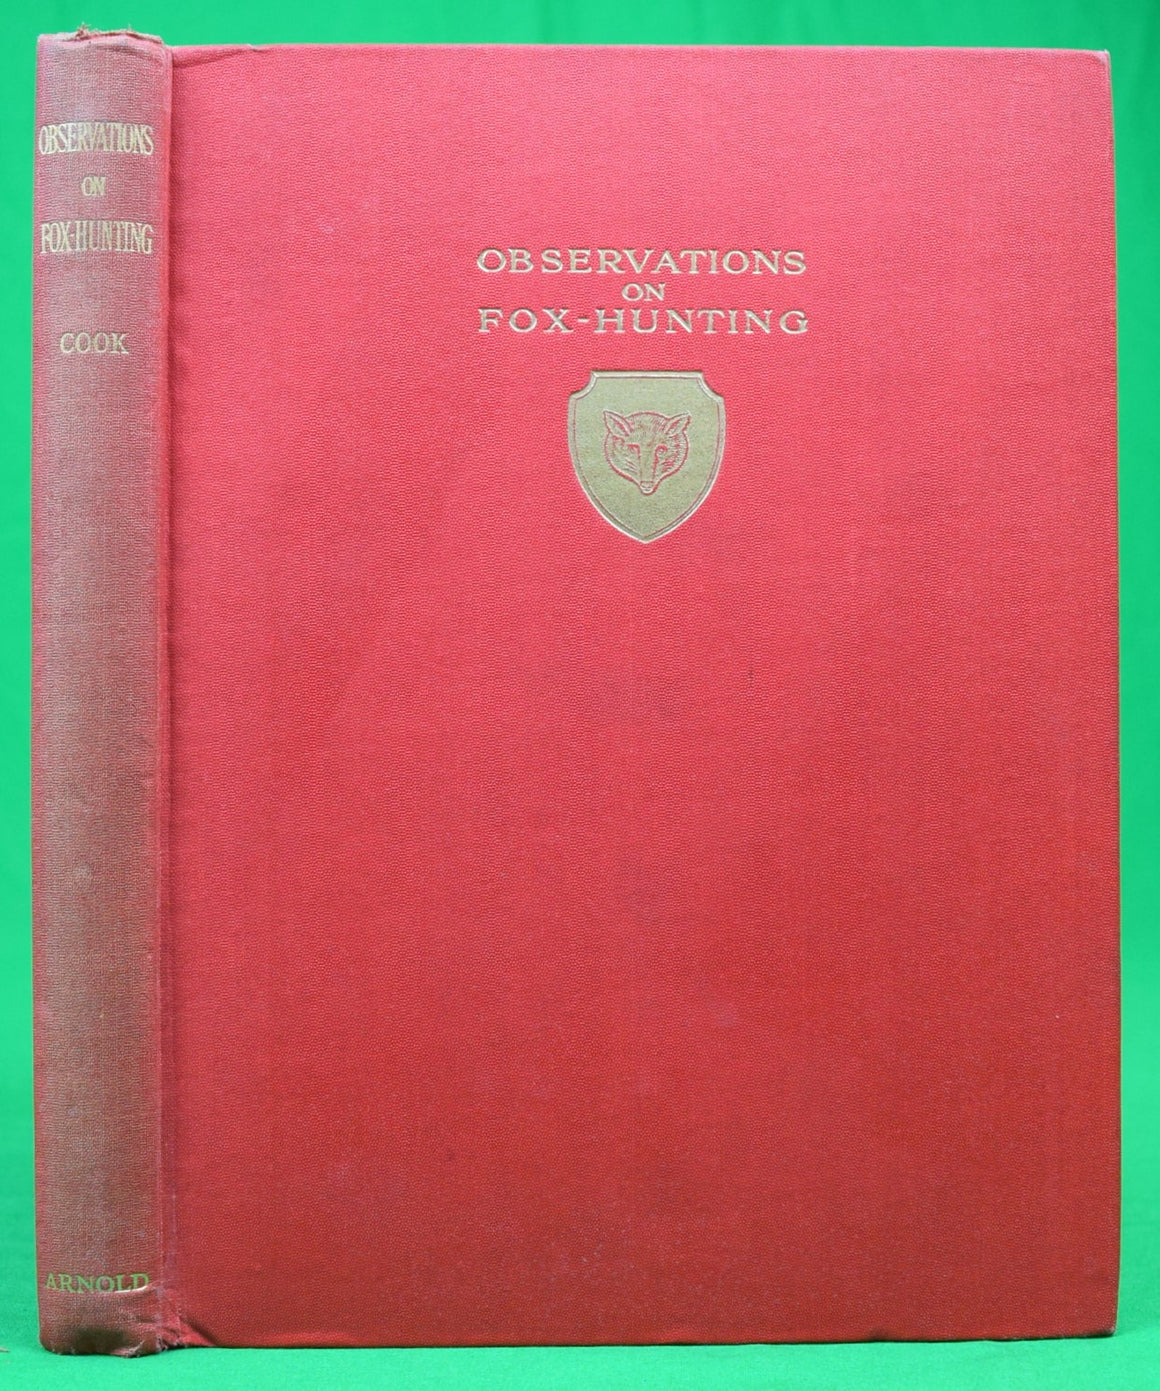 "Observations On Fox-Hunting" 1922 Colonel Cook (SOLD)